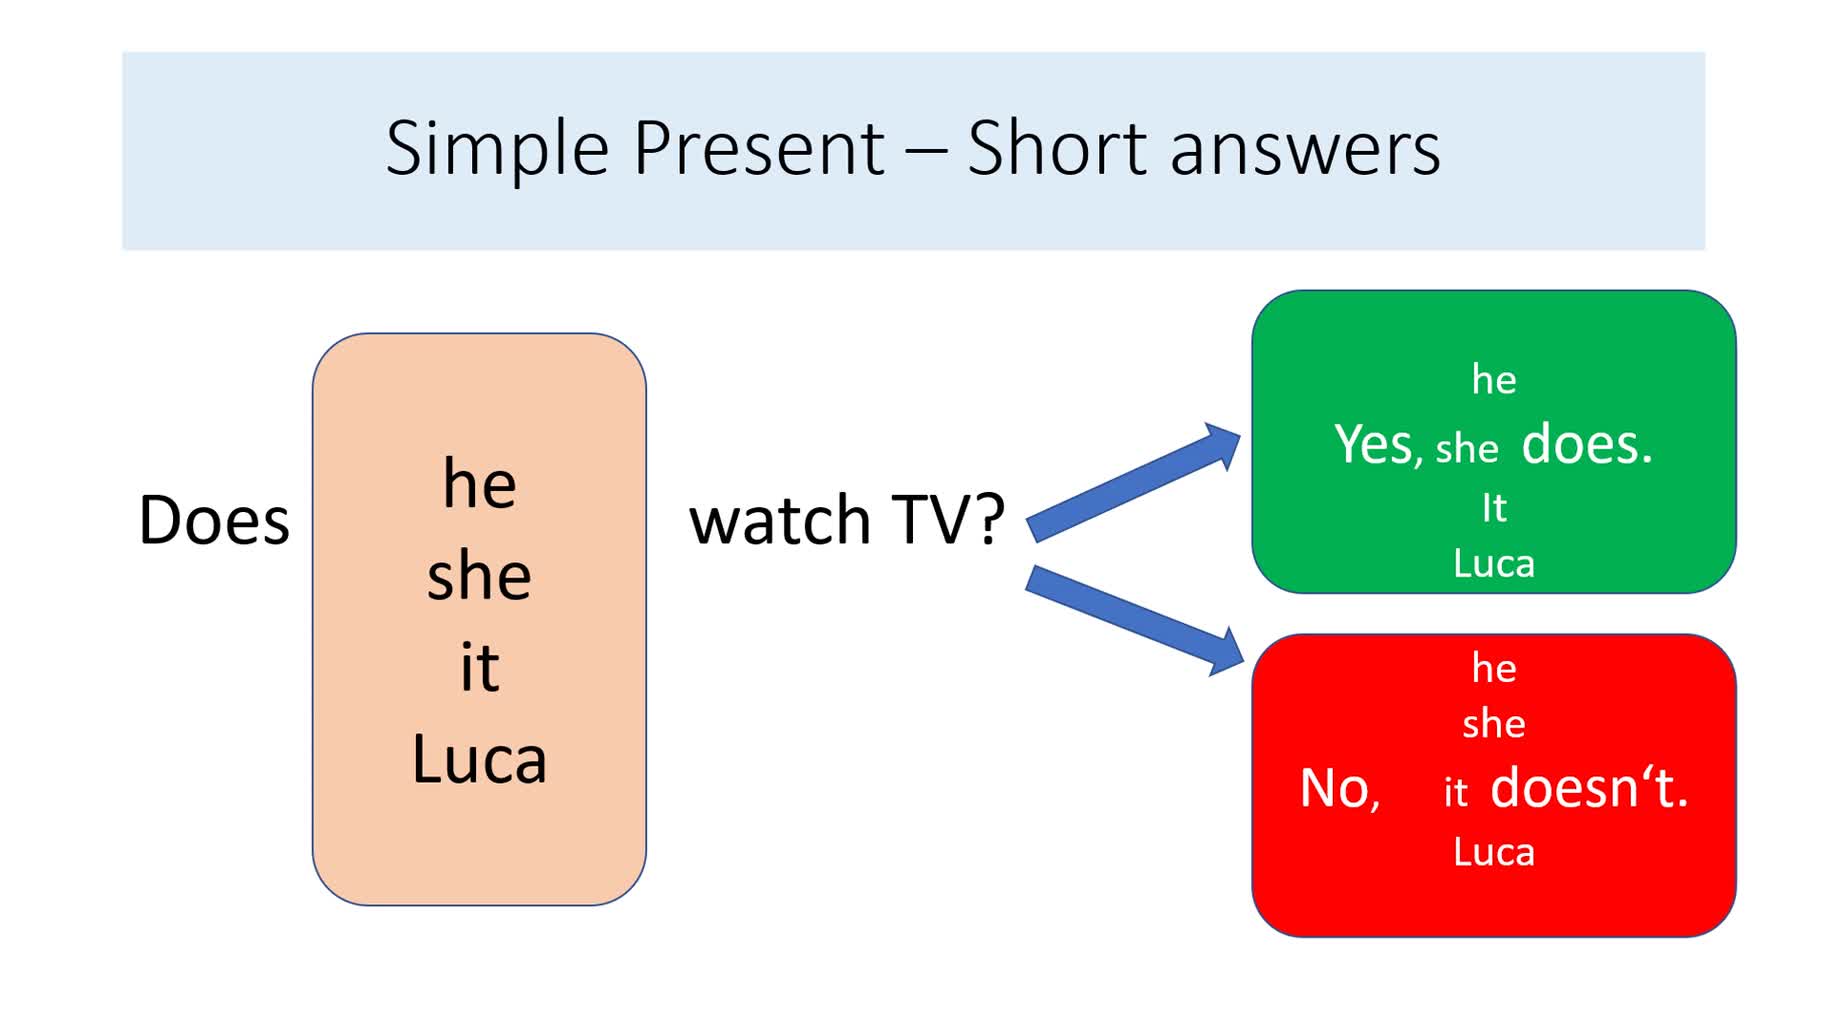 Simple Present - Questions - he, she, it